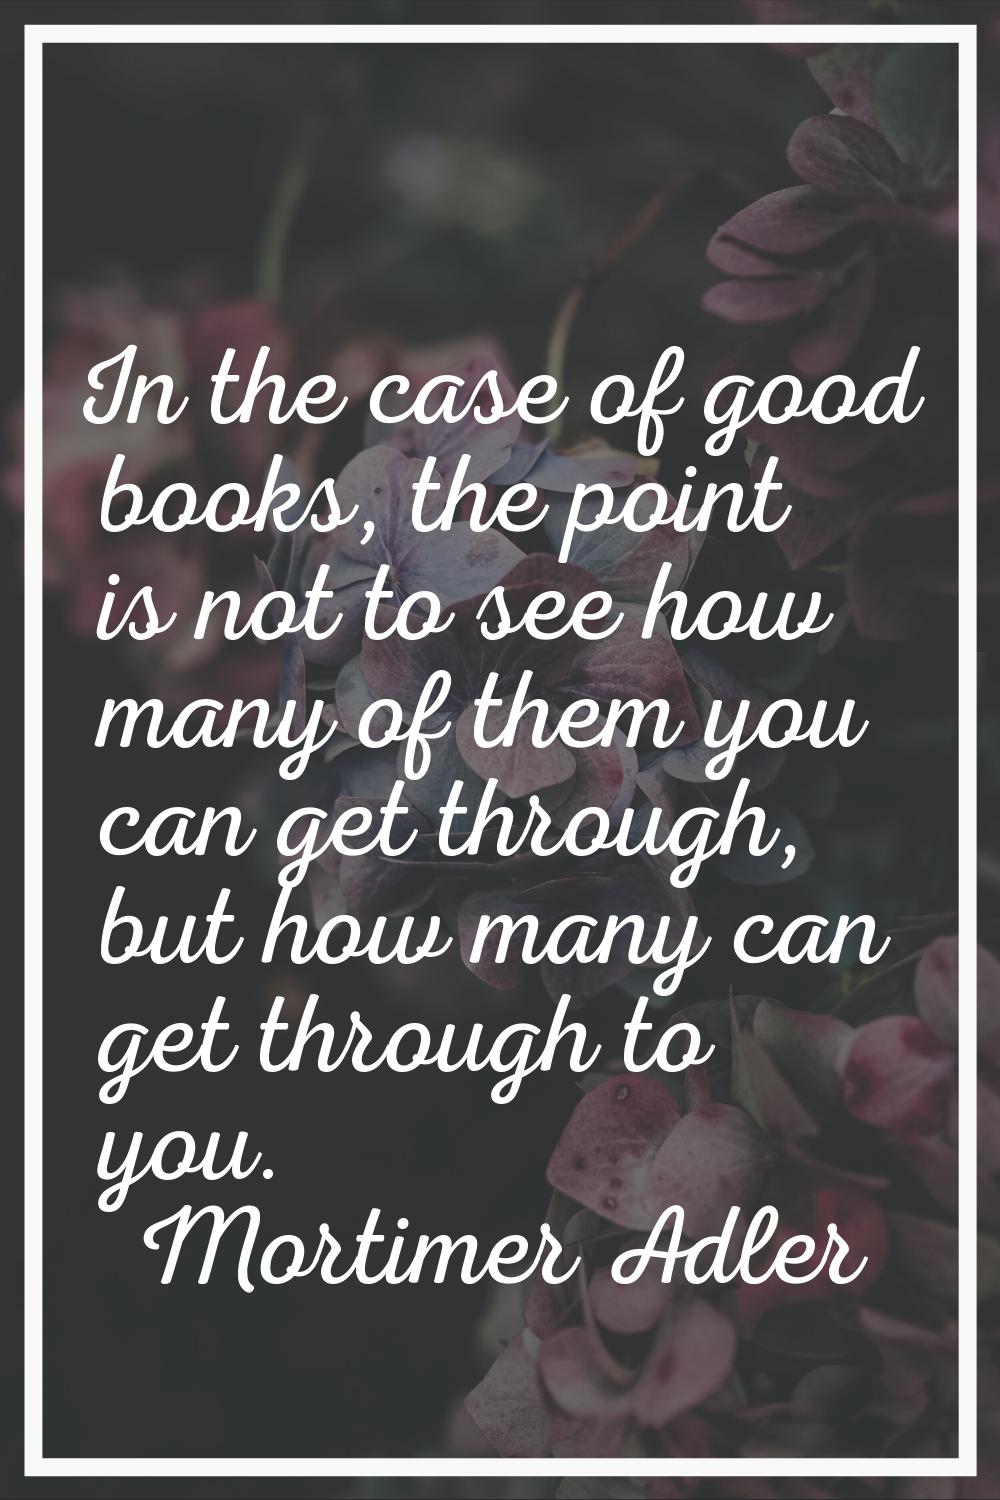 In the case of good books, the point is not to see how many of them you can get through, but how ma